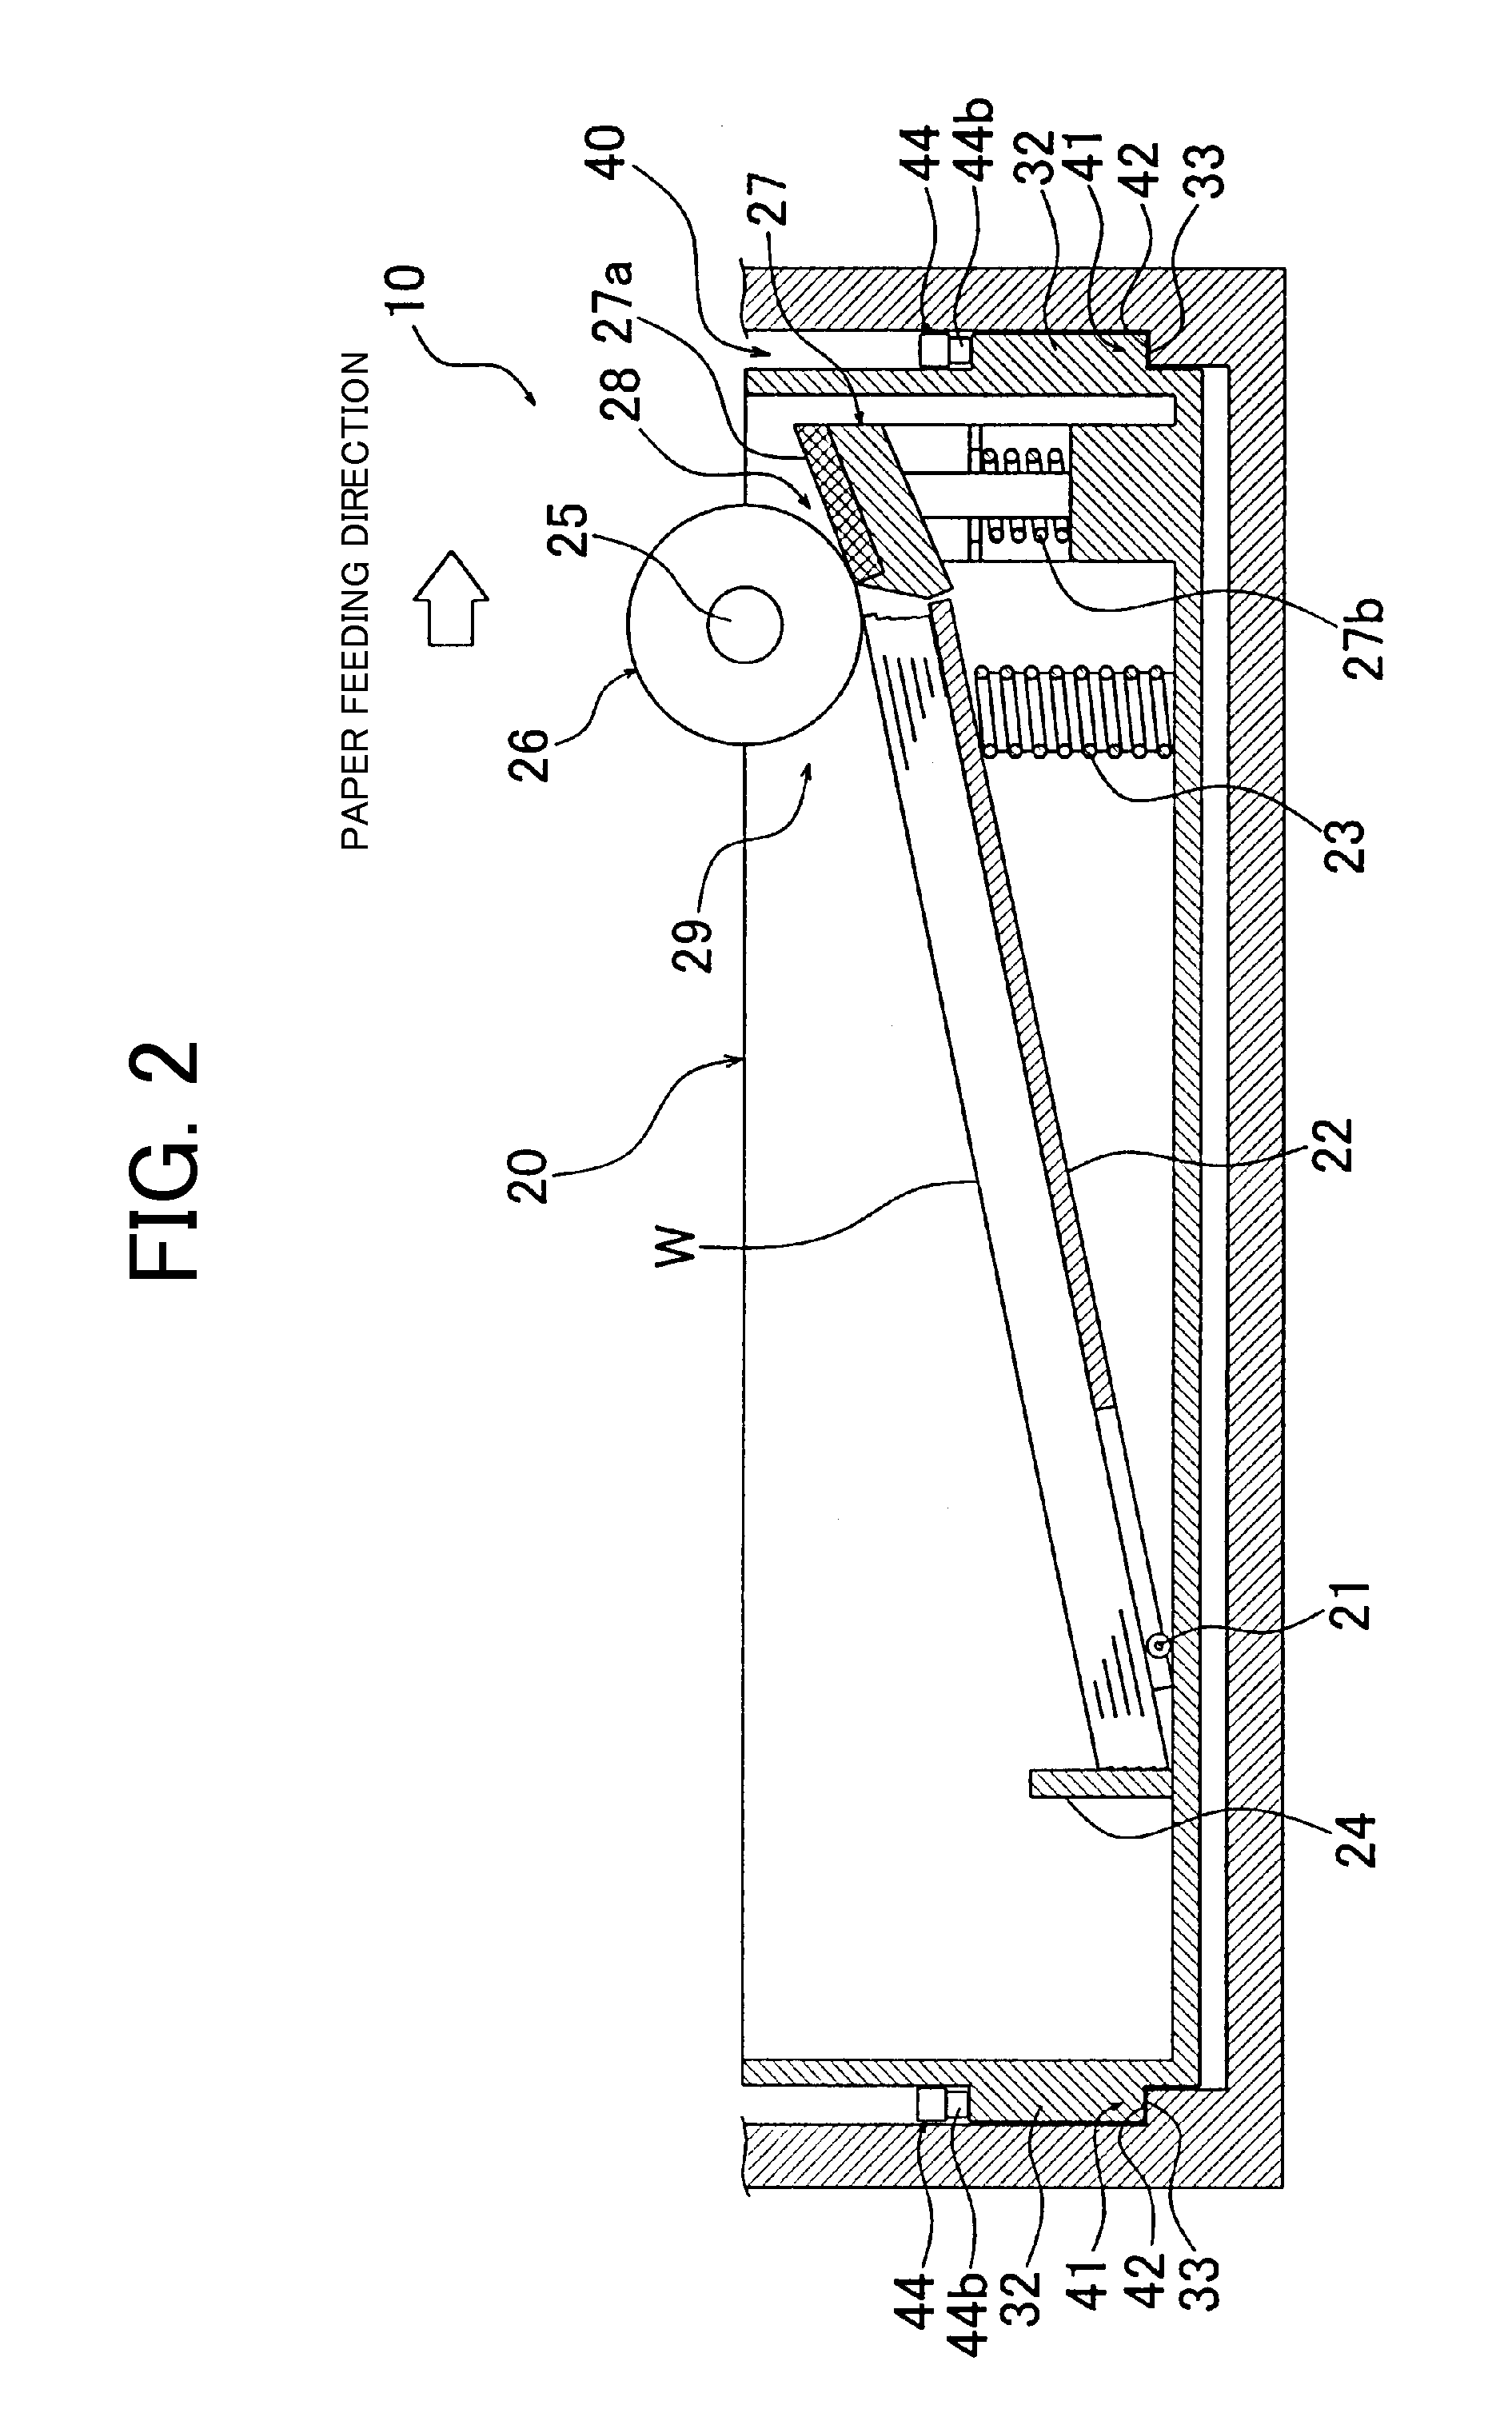 Paper feeder and image forming device